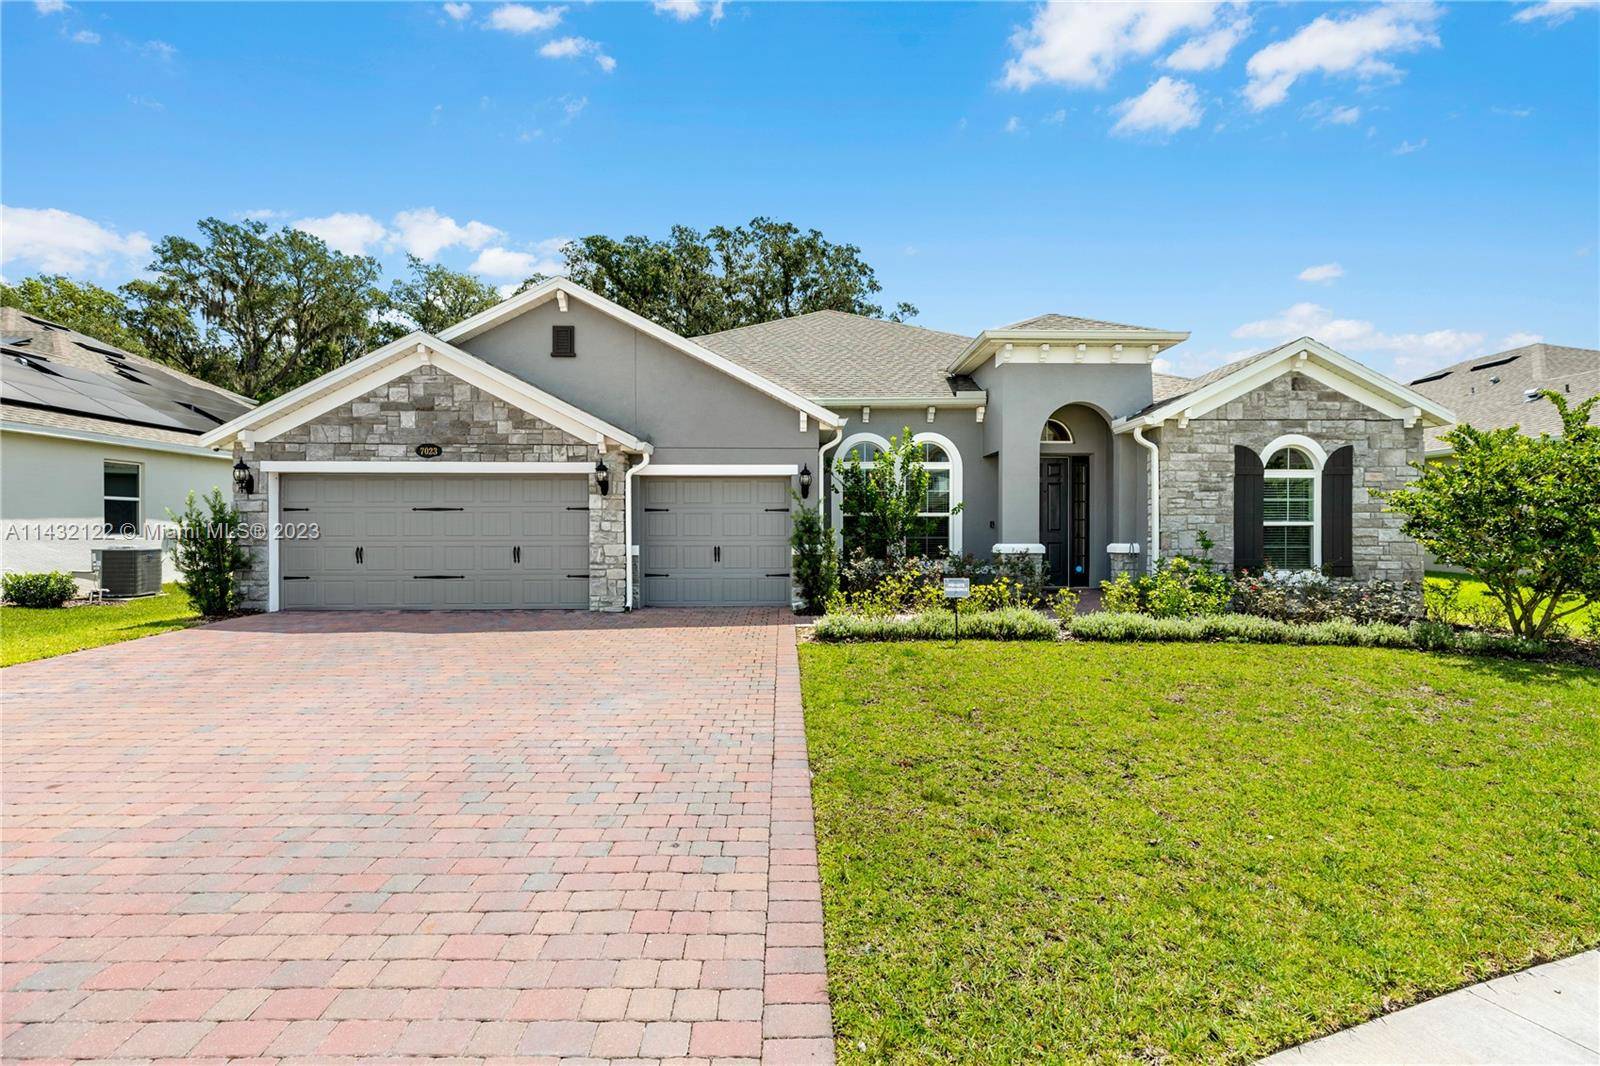 Stunning modern haven nestled in a peaceful community in the heart of Sanford that offers both tranquility and convenience.